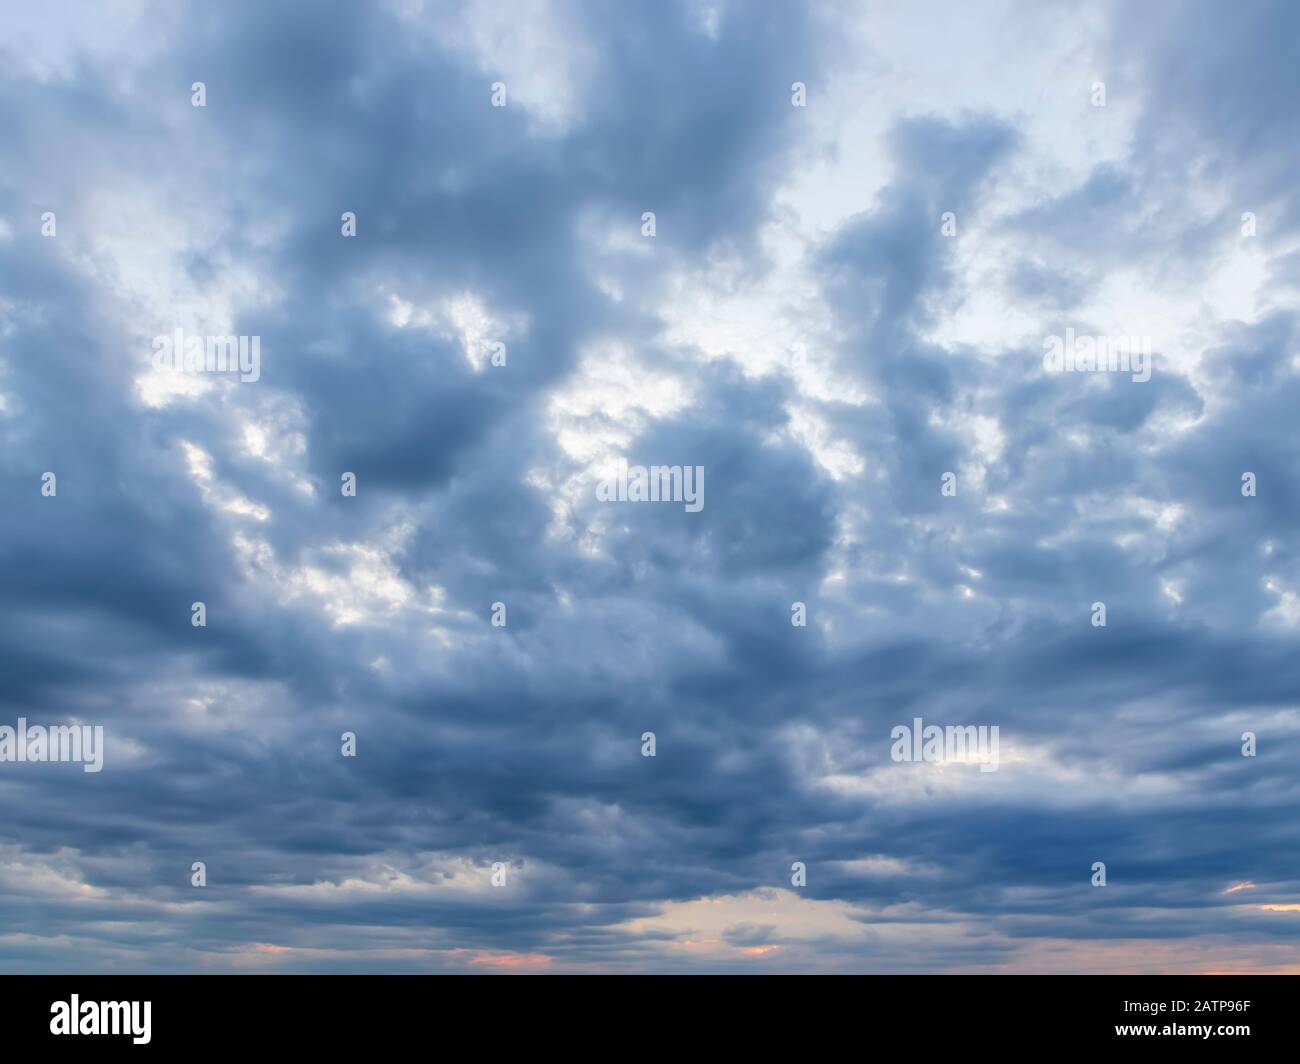 incoming storm clouds Stock Photo